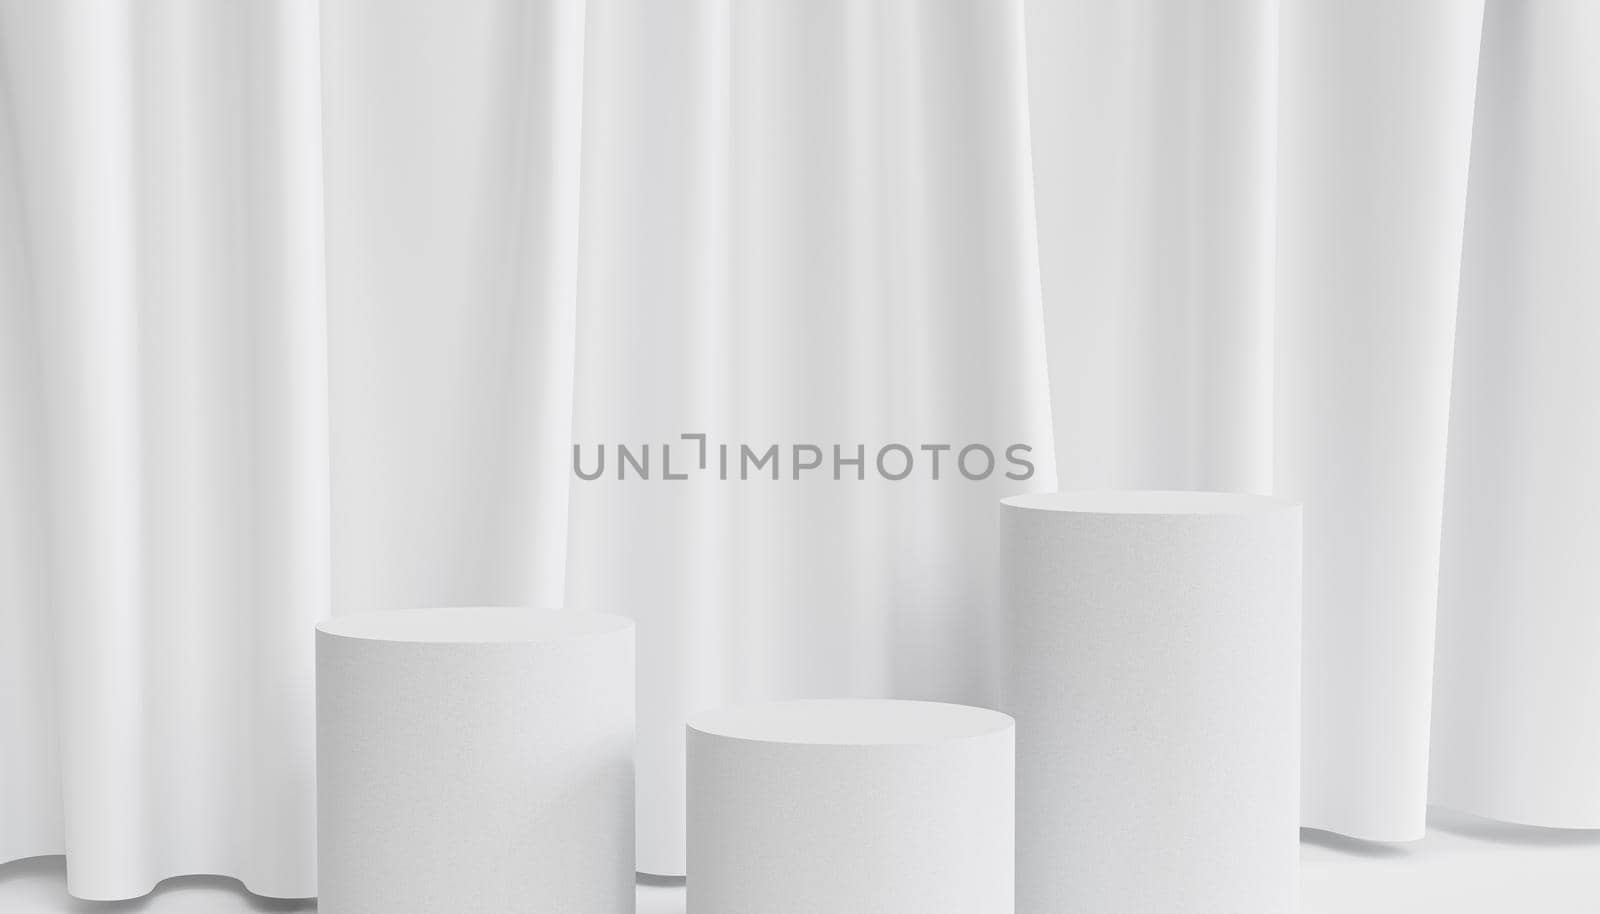 Cylinder podiums or pedestals for products or advertising on white background with curtains, minimal 3d render by Frostroomhead